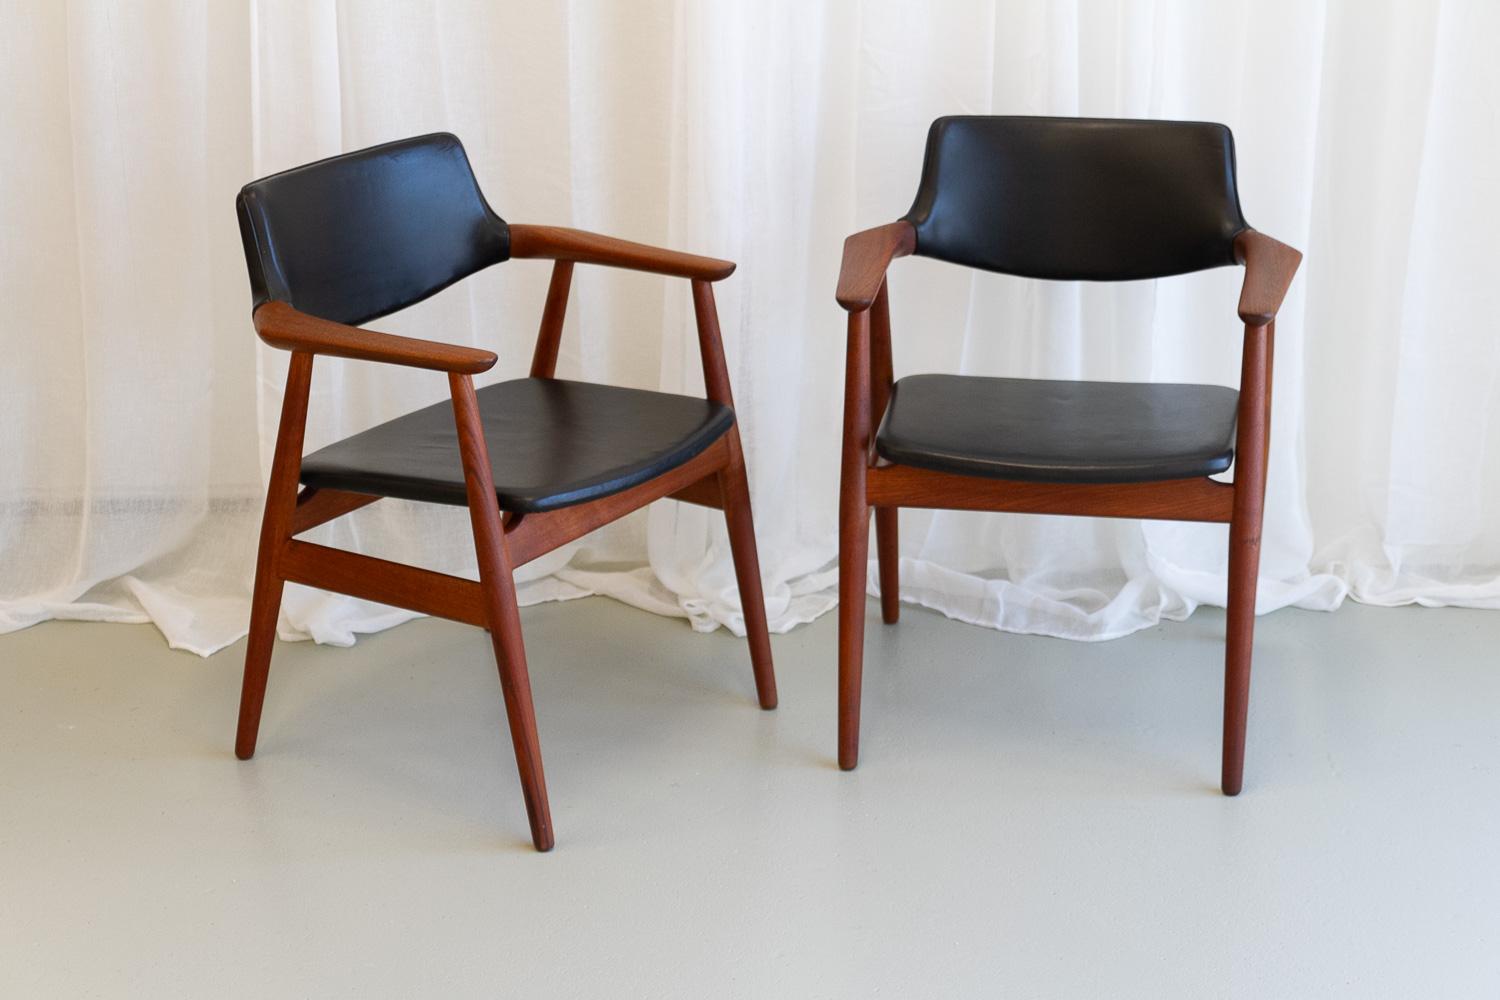 Mid-Century Danish Teak GM11 Armchairs by Svend Aage Eriksen, 1960s. Set of 2.
Pair of original vintage GM 11 chairs in solid teak and black leather designed by Danish architect Svend Åge Eriksen for Glostrup Møbelfabrik, Denmark in the 1960s.
This